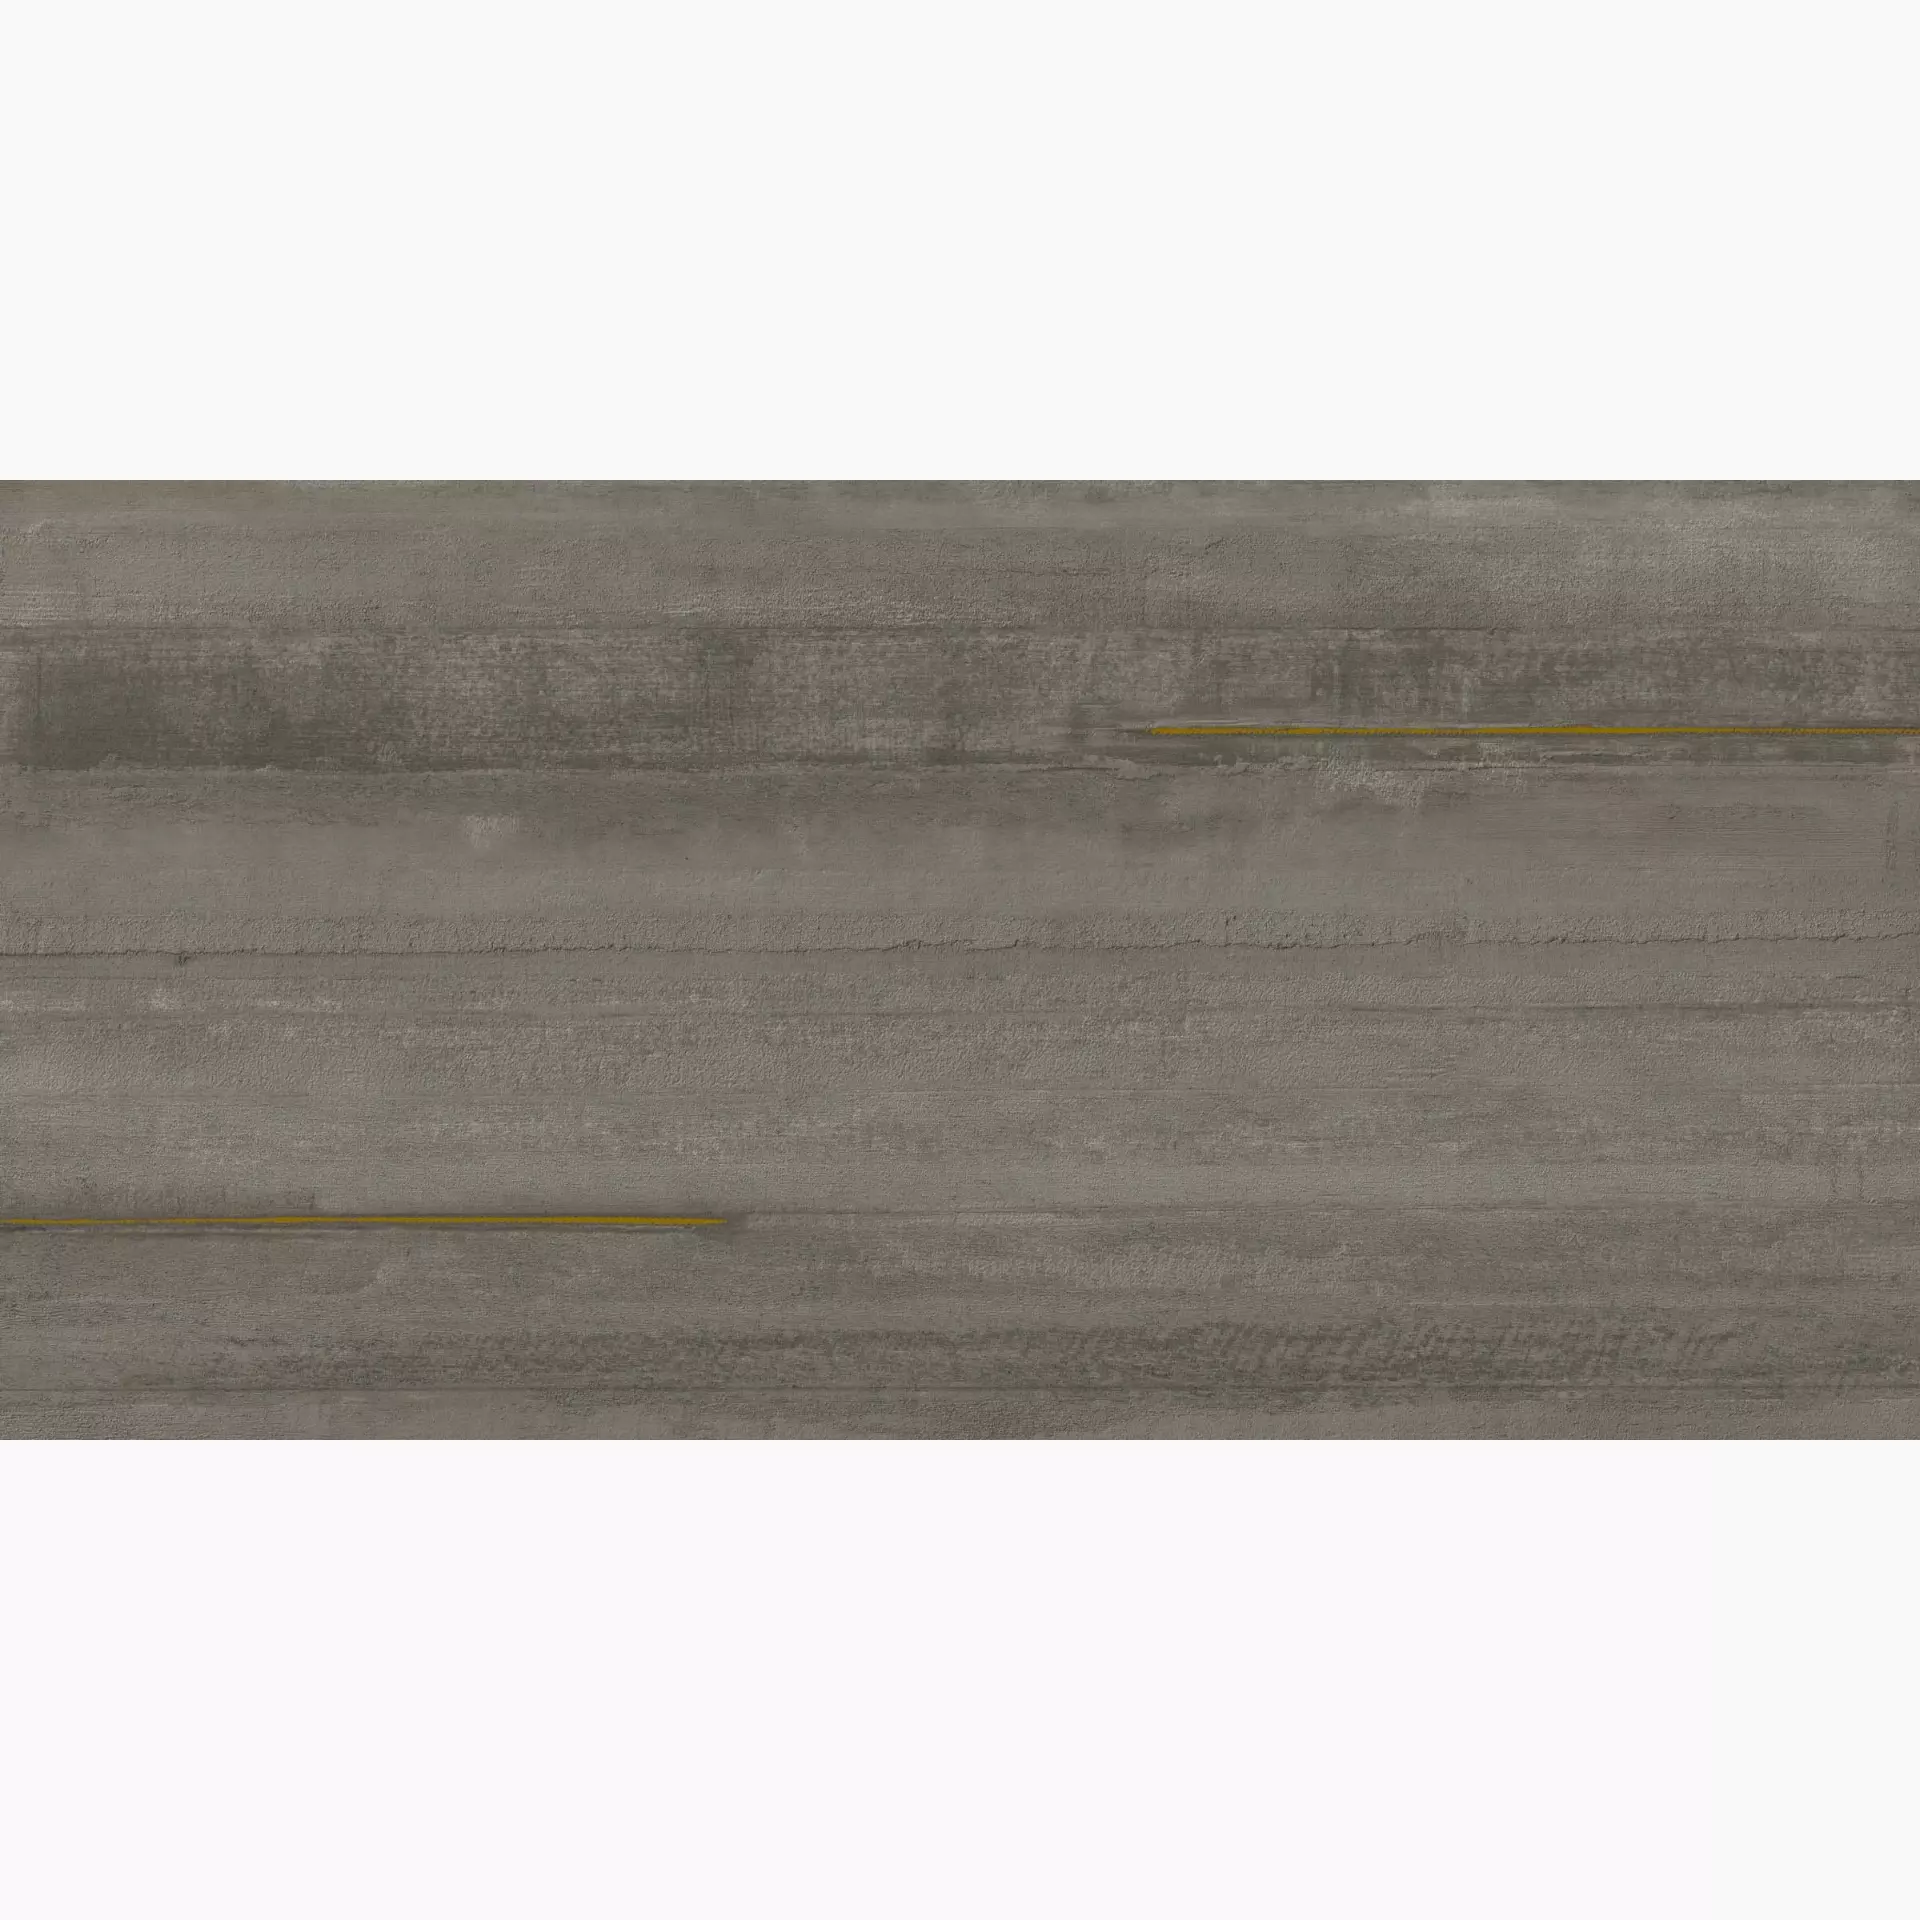 ABK Lab325 Metal Taupe Naturale PF60002676 60x120cm rectified 8,5mm